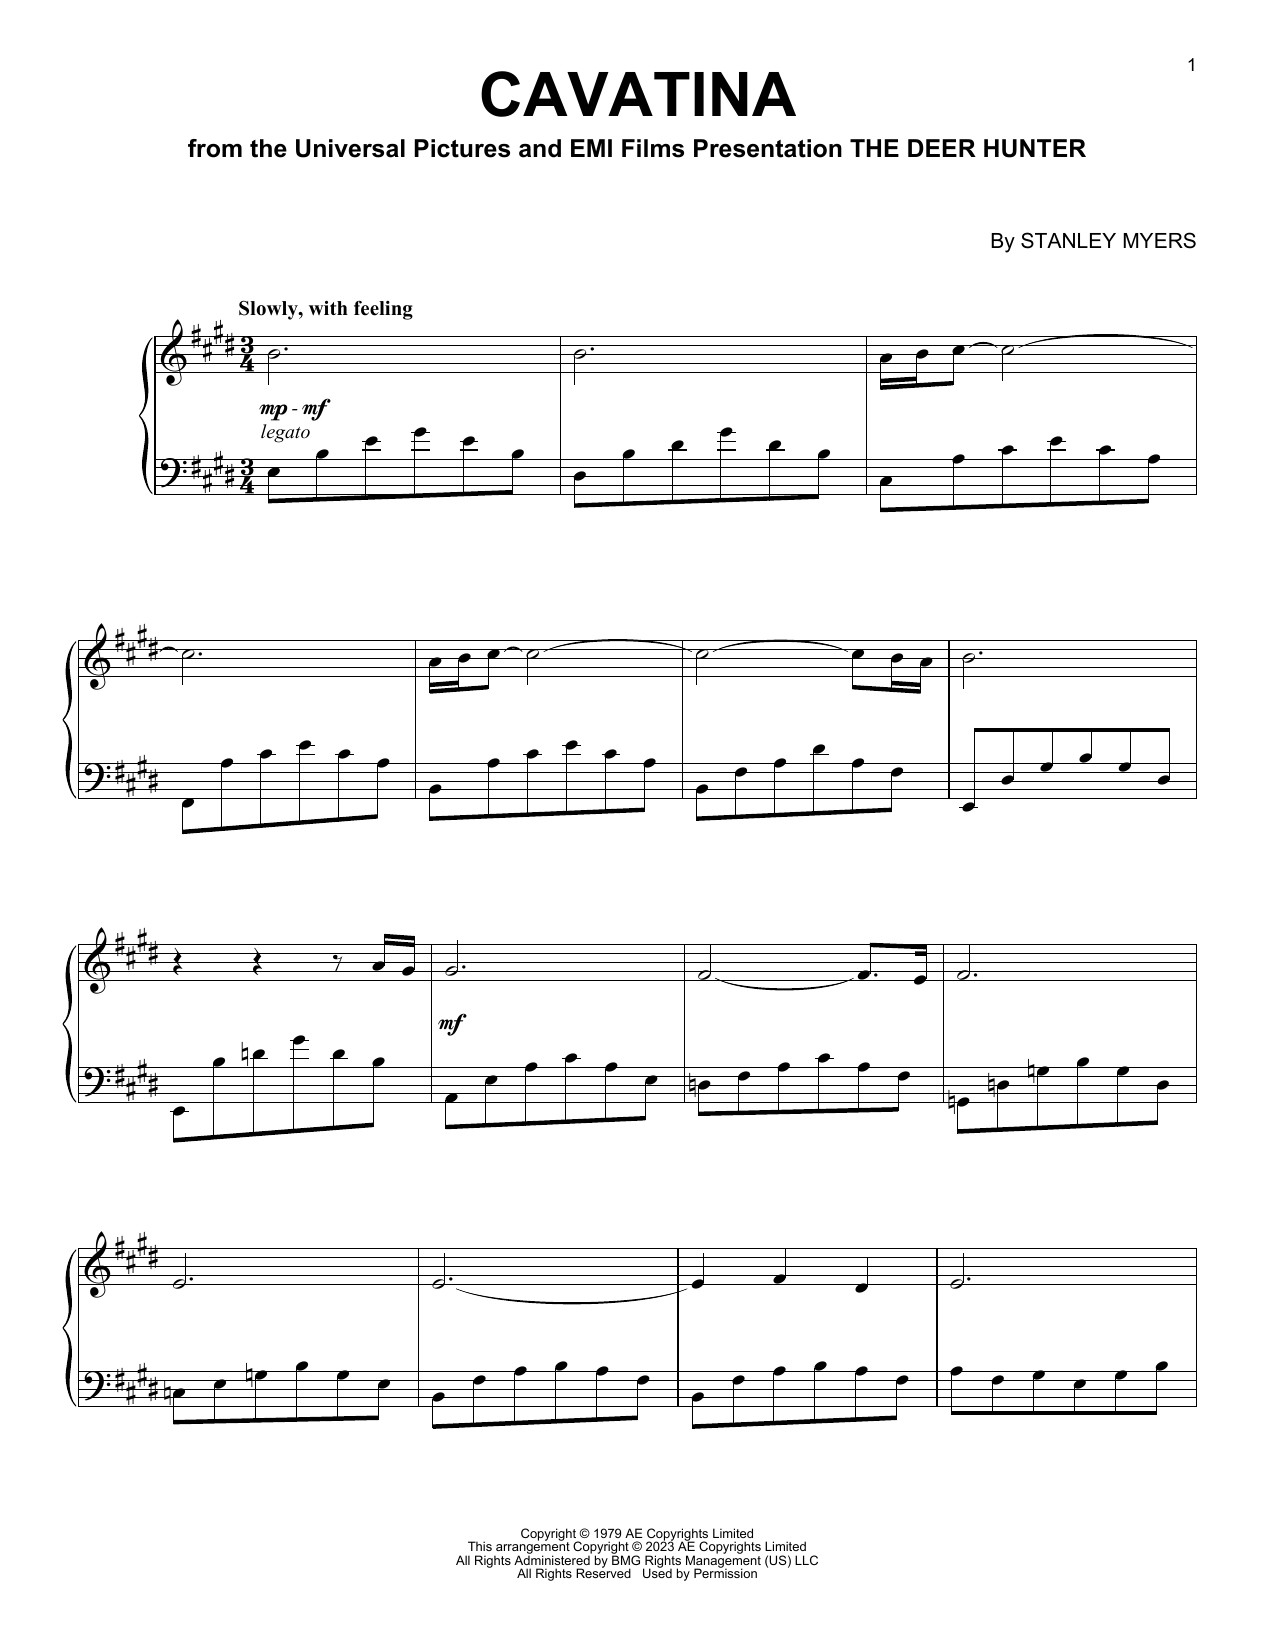 Stanley Myers Cavatina (from The Deer Hunter) sheet music notes and chords. Download Printable PDF.